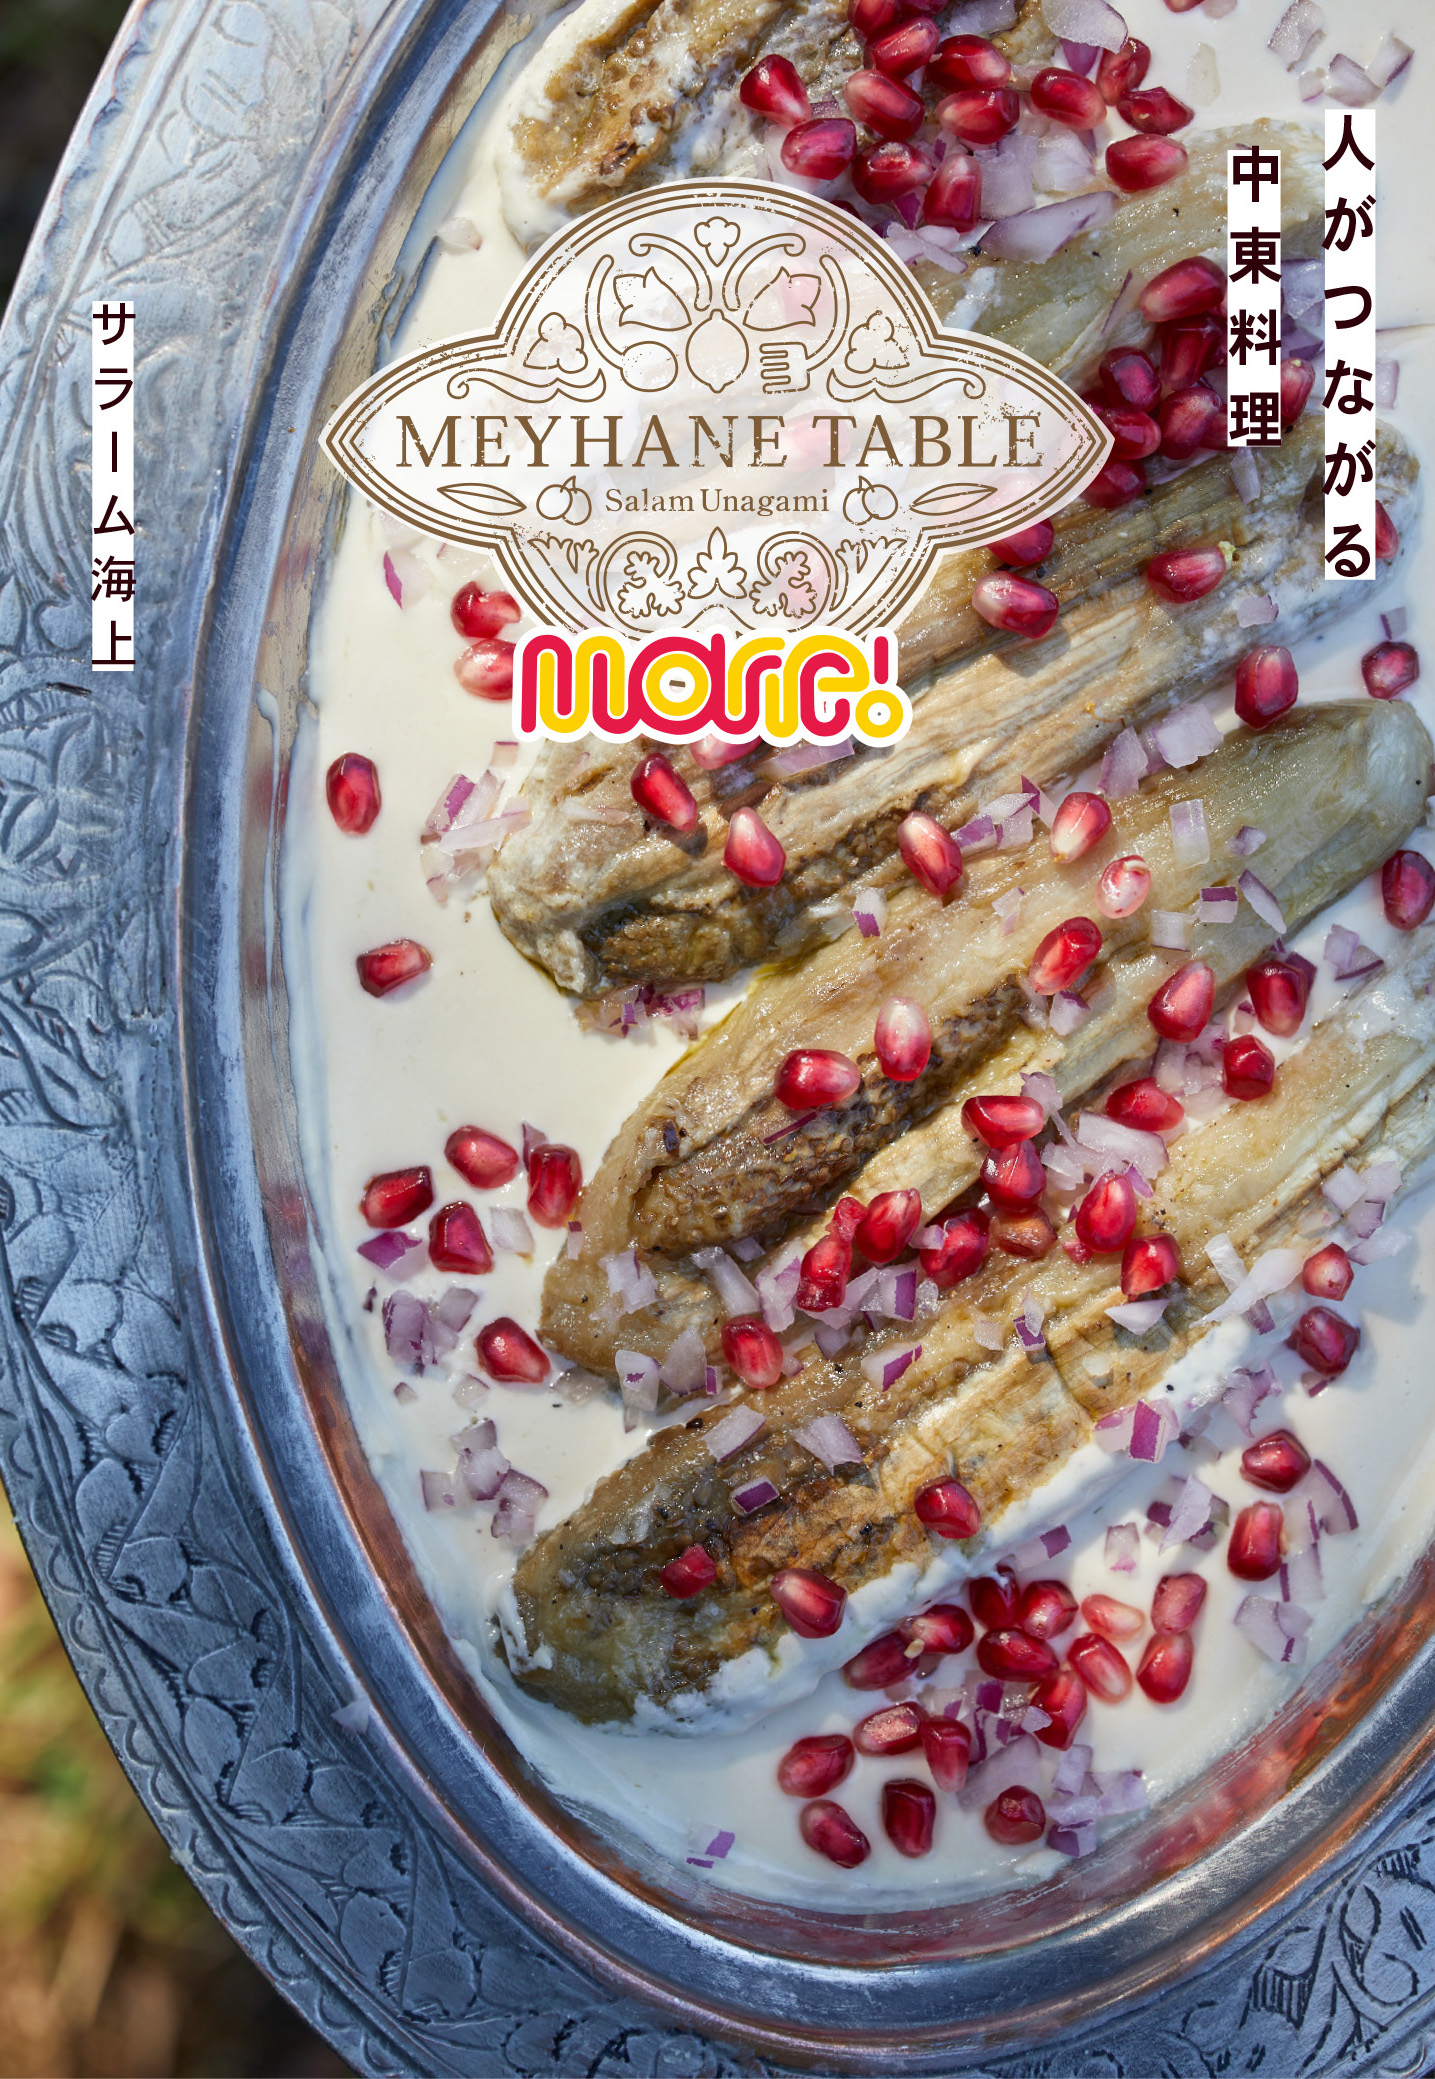 MEYHANE TABLE More! お取扱書店随時増えてます！